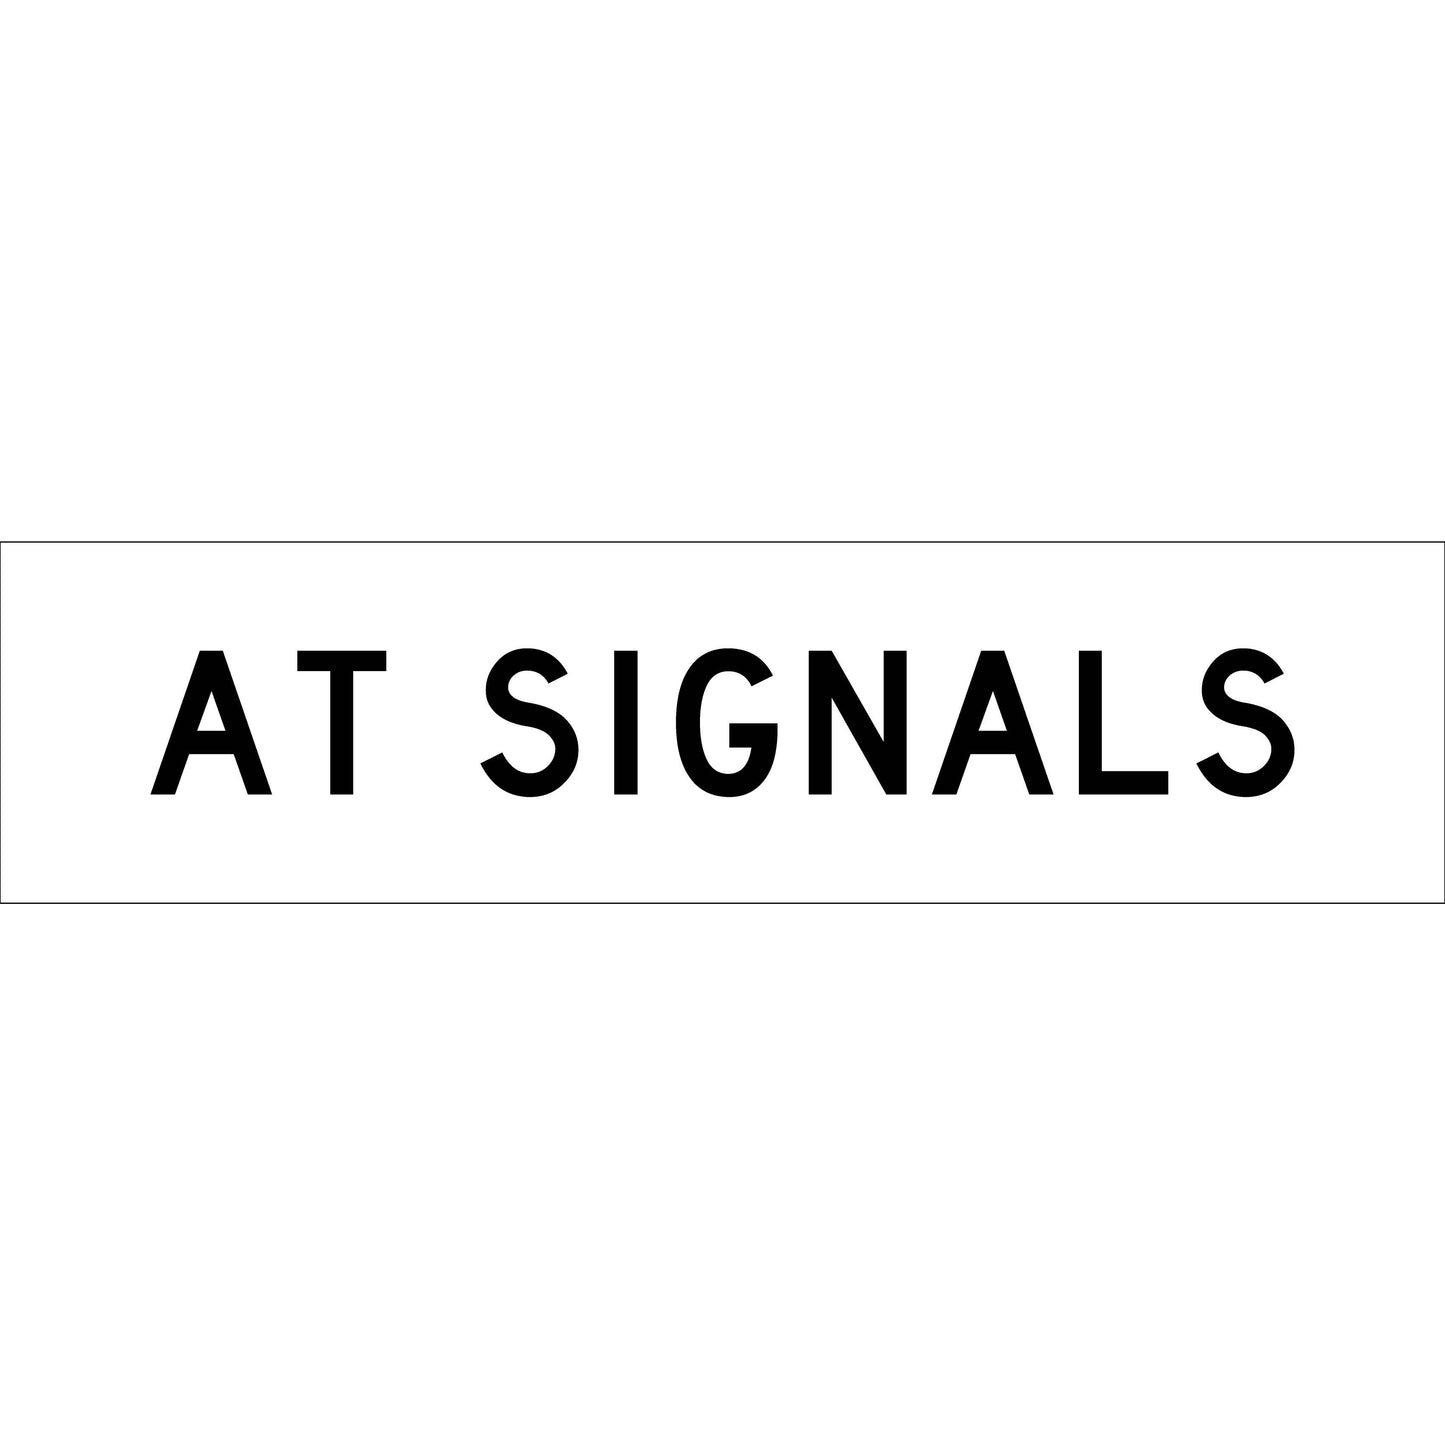 At Signals Long Skinny Multi Message Traffic Sign